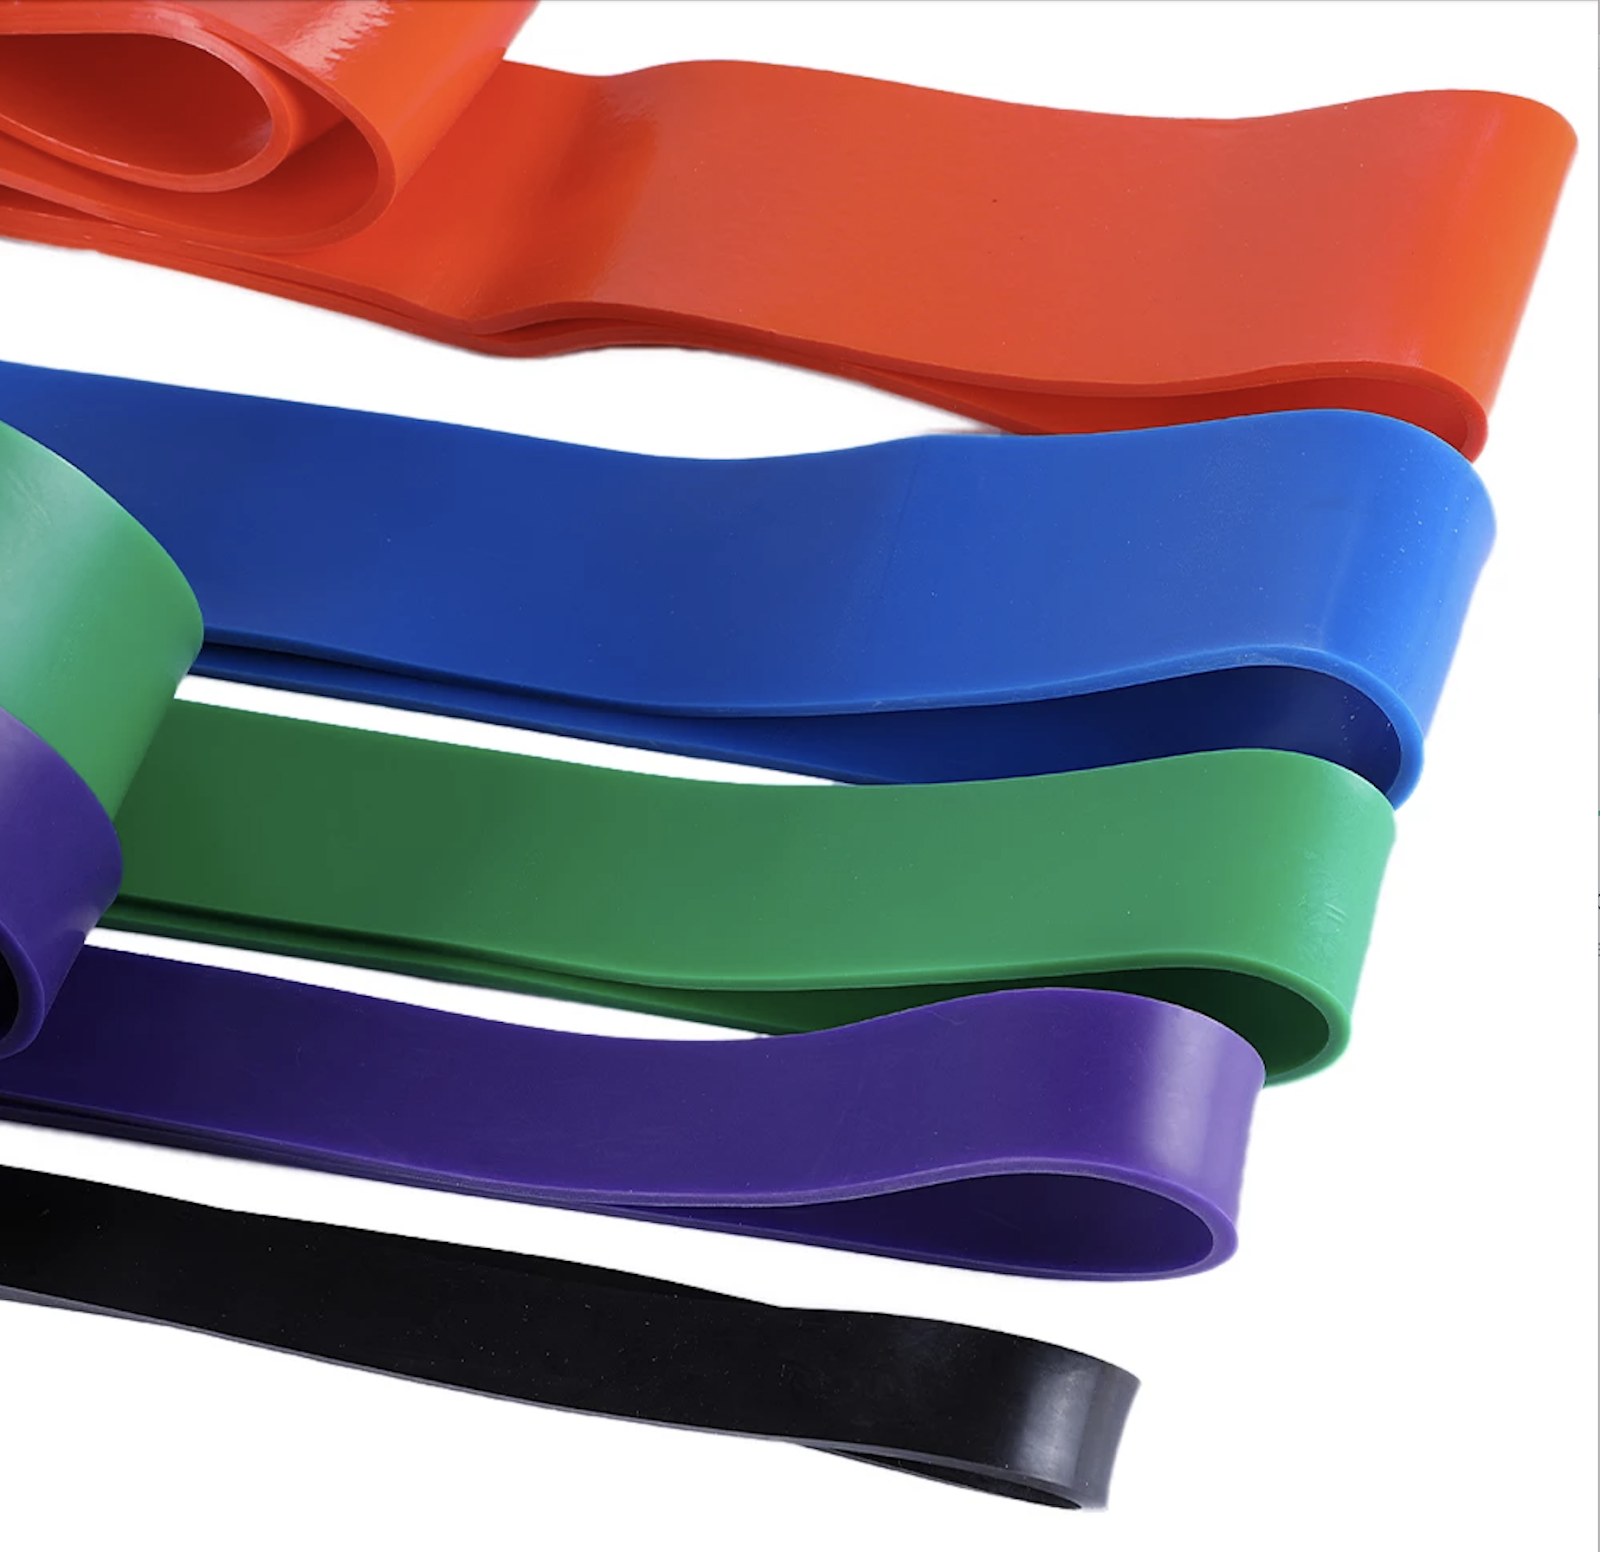 Resistance bands come in different colors/weights